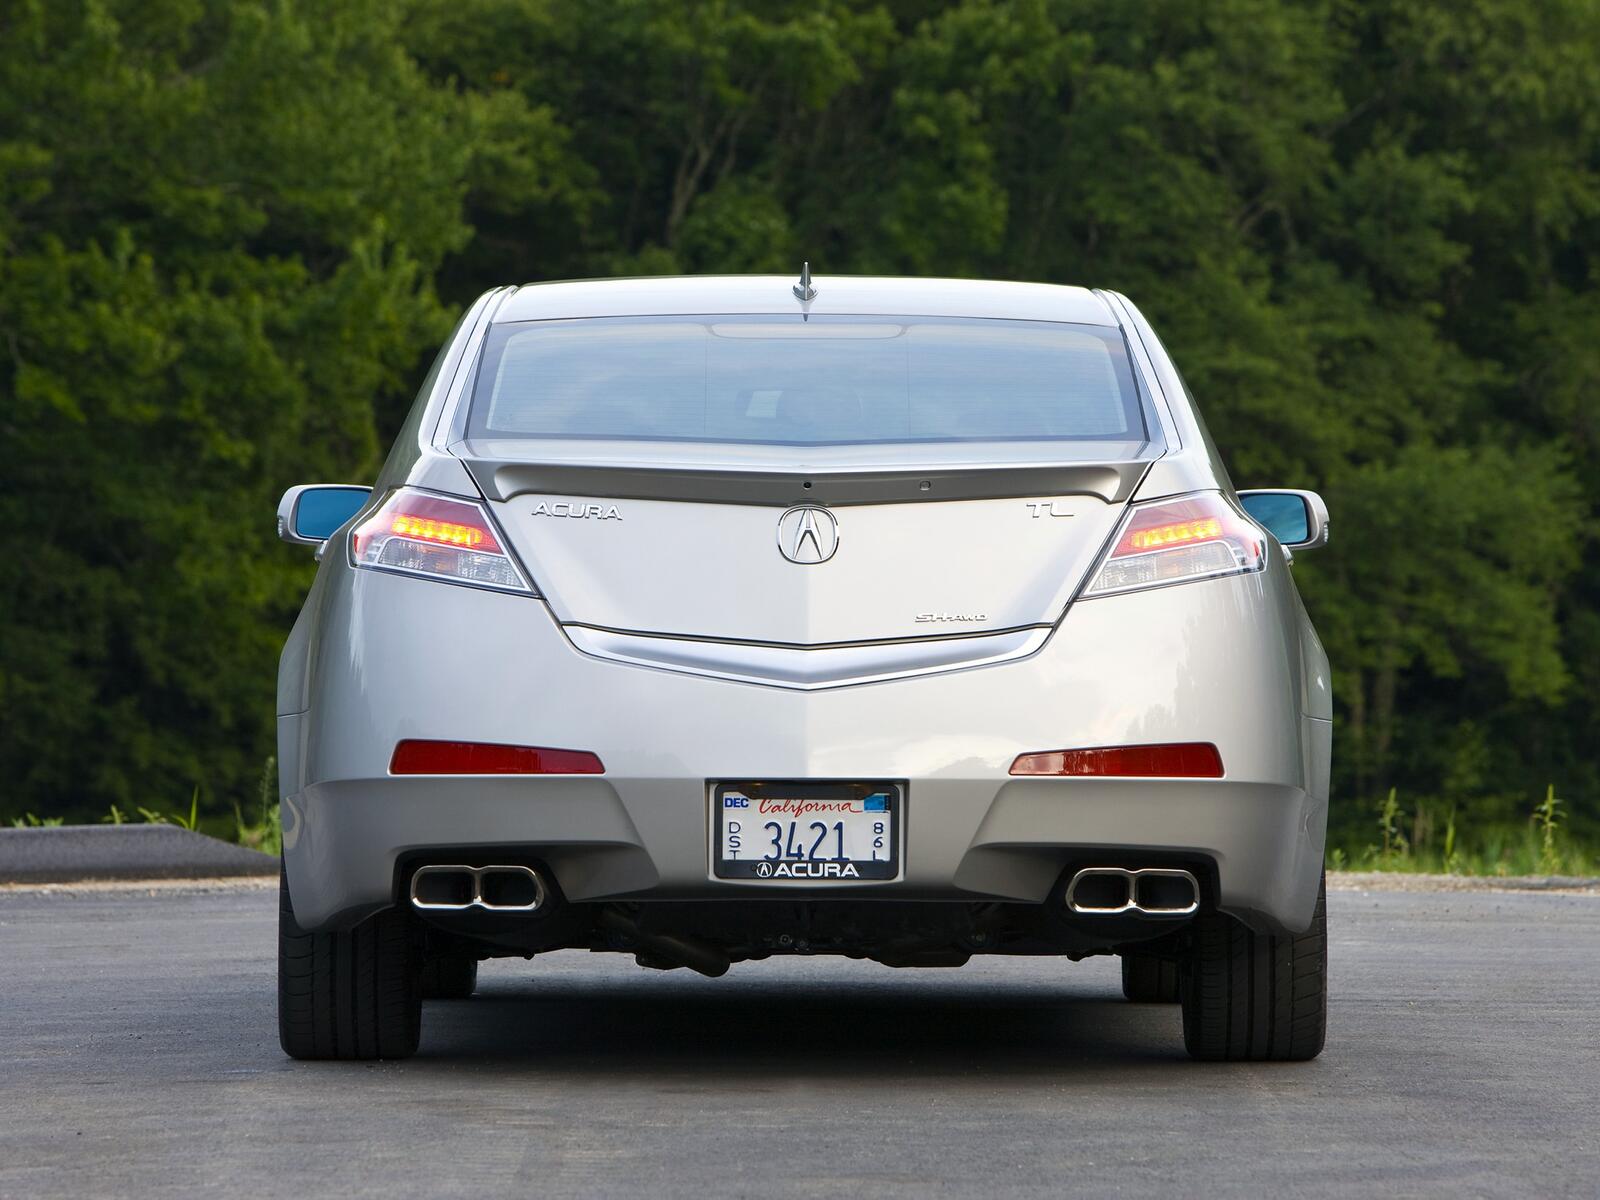 Wallpapers view from behind Acura Zdx tl on the desktop